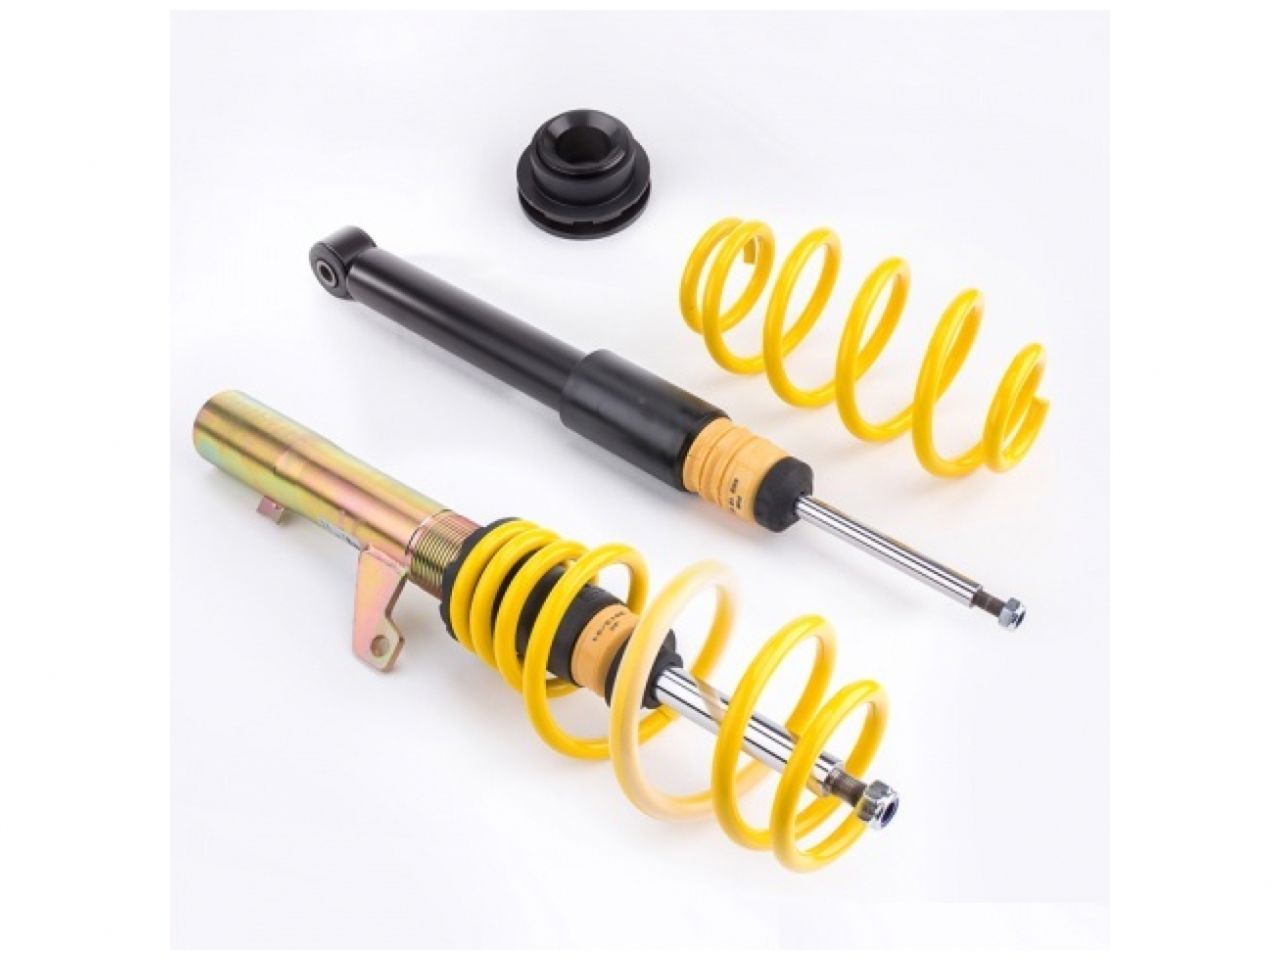 ST Suspensions ST X Height Adjustable Coilover Kit